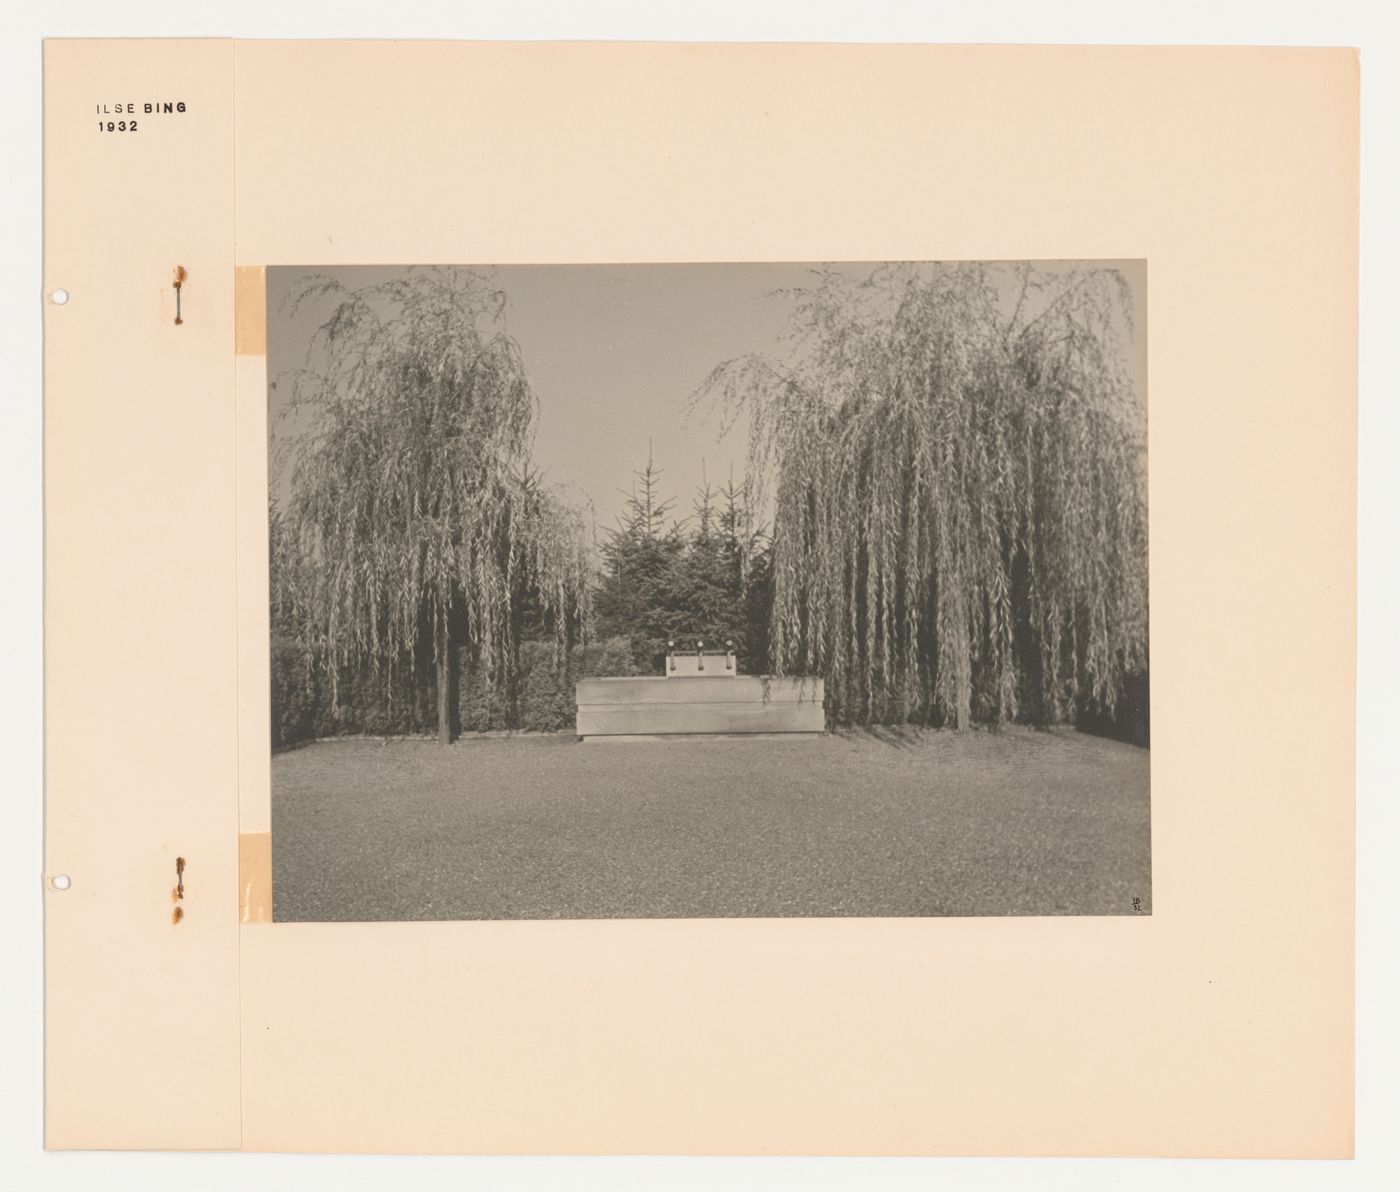 View of a structure and trees at the New Jewish Cemetery [Neuer Jüdischer Friedhof], Frankfurt am Main, Germany